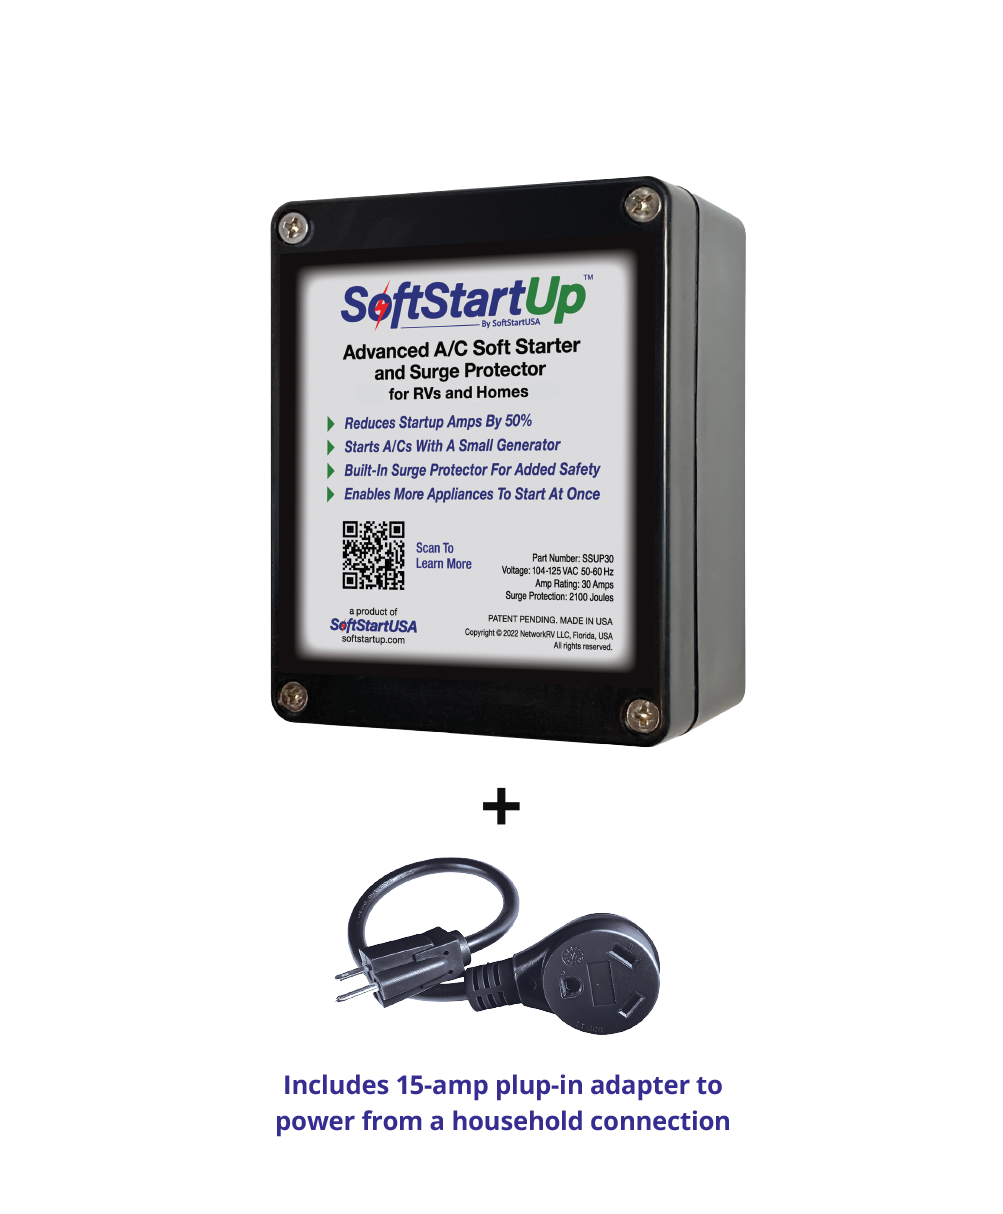 https://softstartup.com/wp-content/uploads/2022/07/SoftStartUp-Box-Plus-15-Amp-Cable-Isolated.png